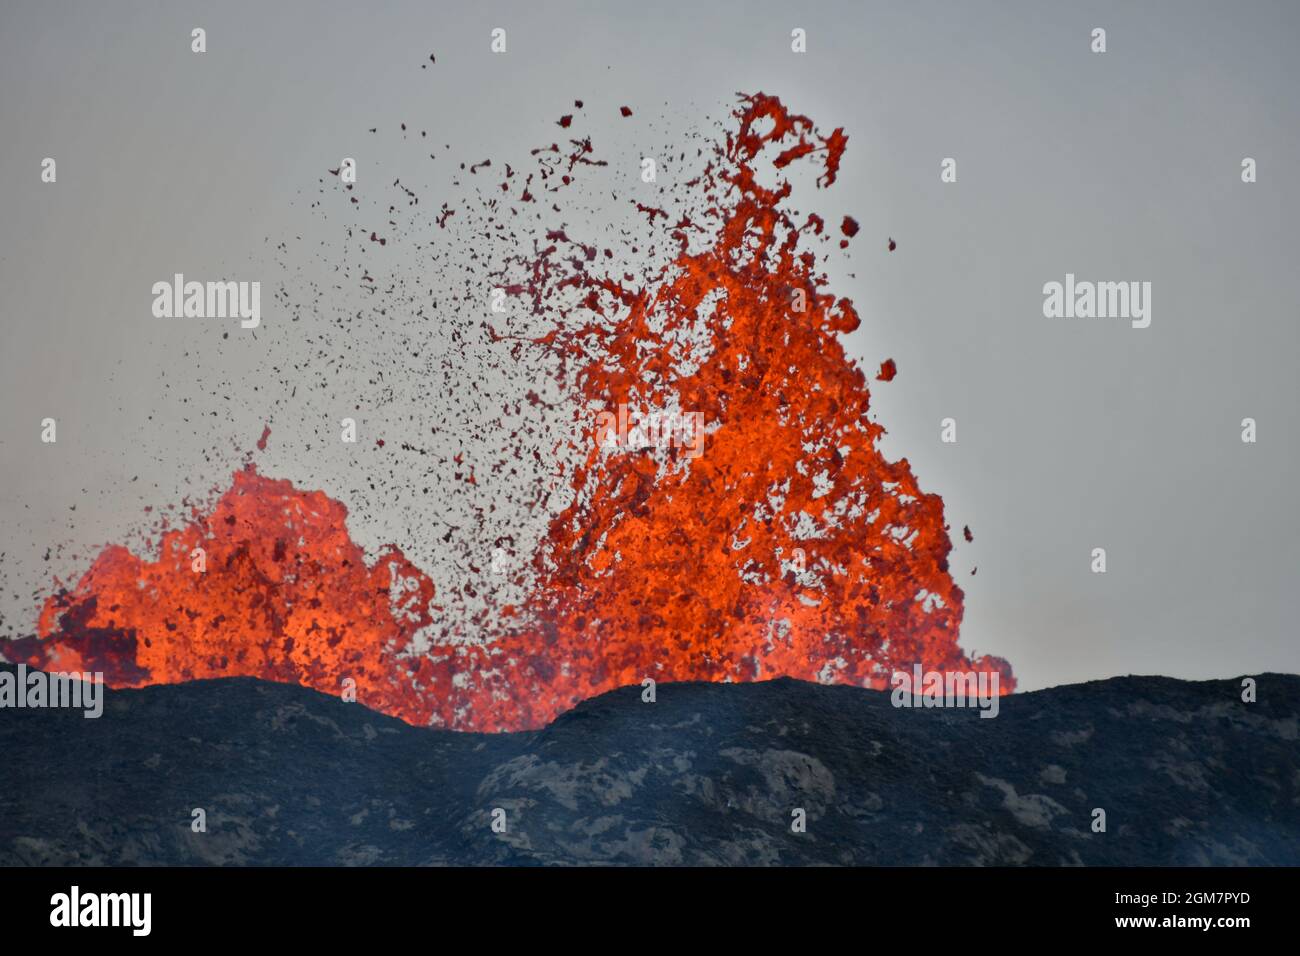 Lava fountain inside the crater of Fagradalsfjall volcano Stock Photo